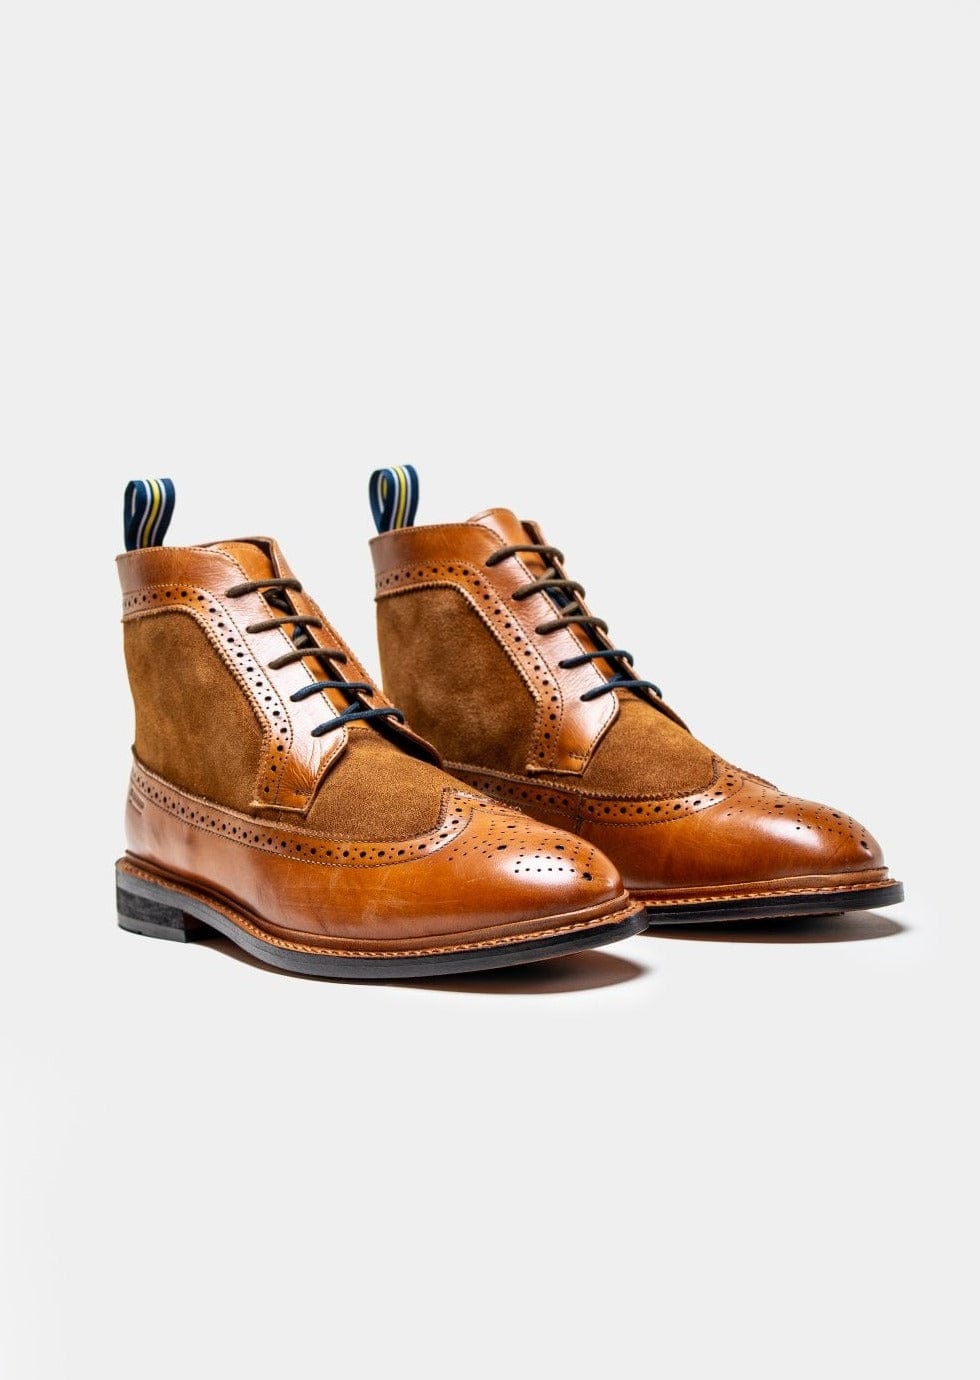 BOSWORTH TAN LEATHER BROGUE BOOTS